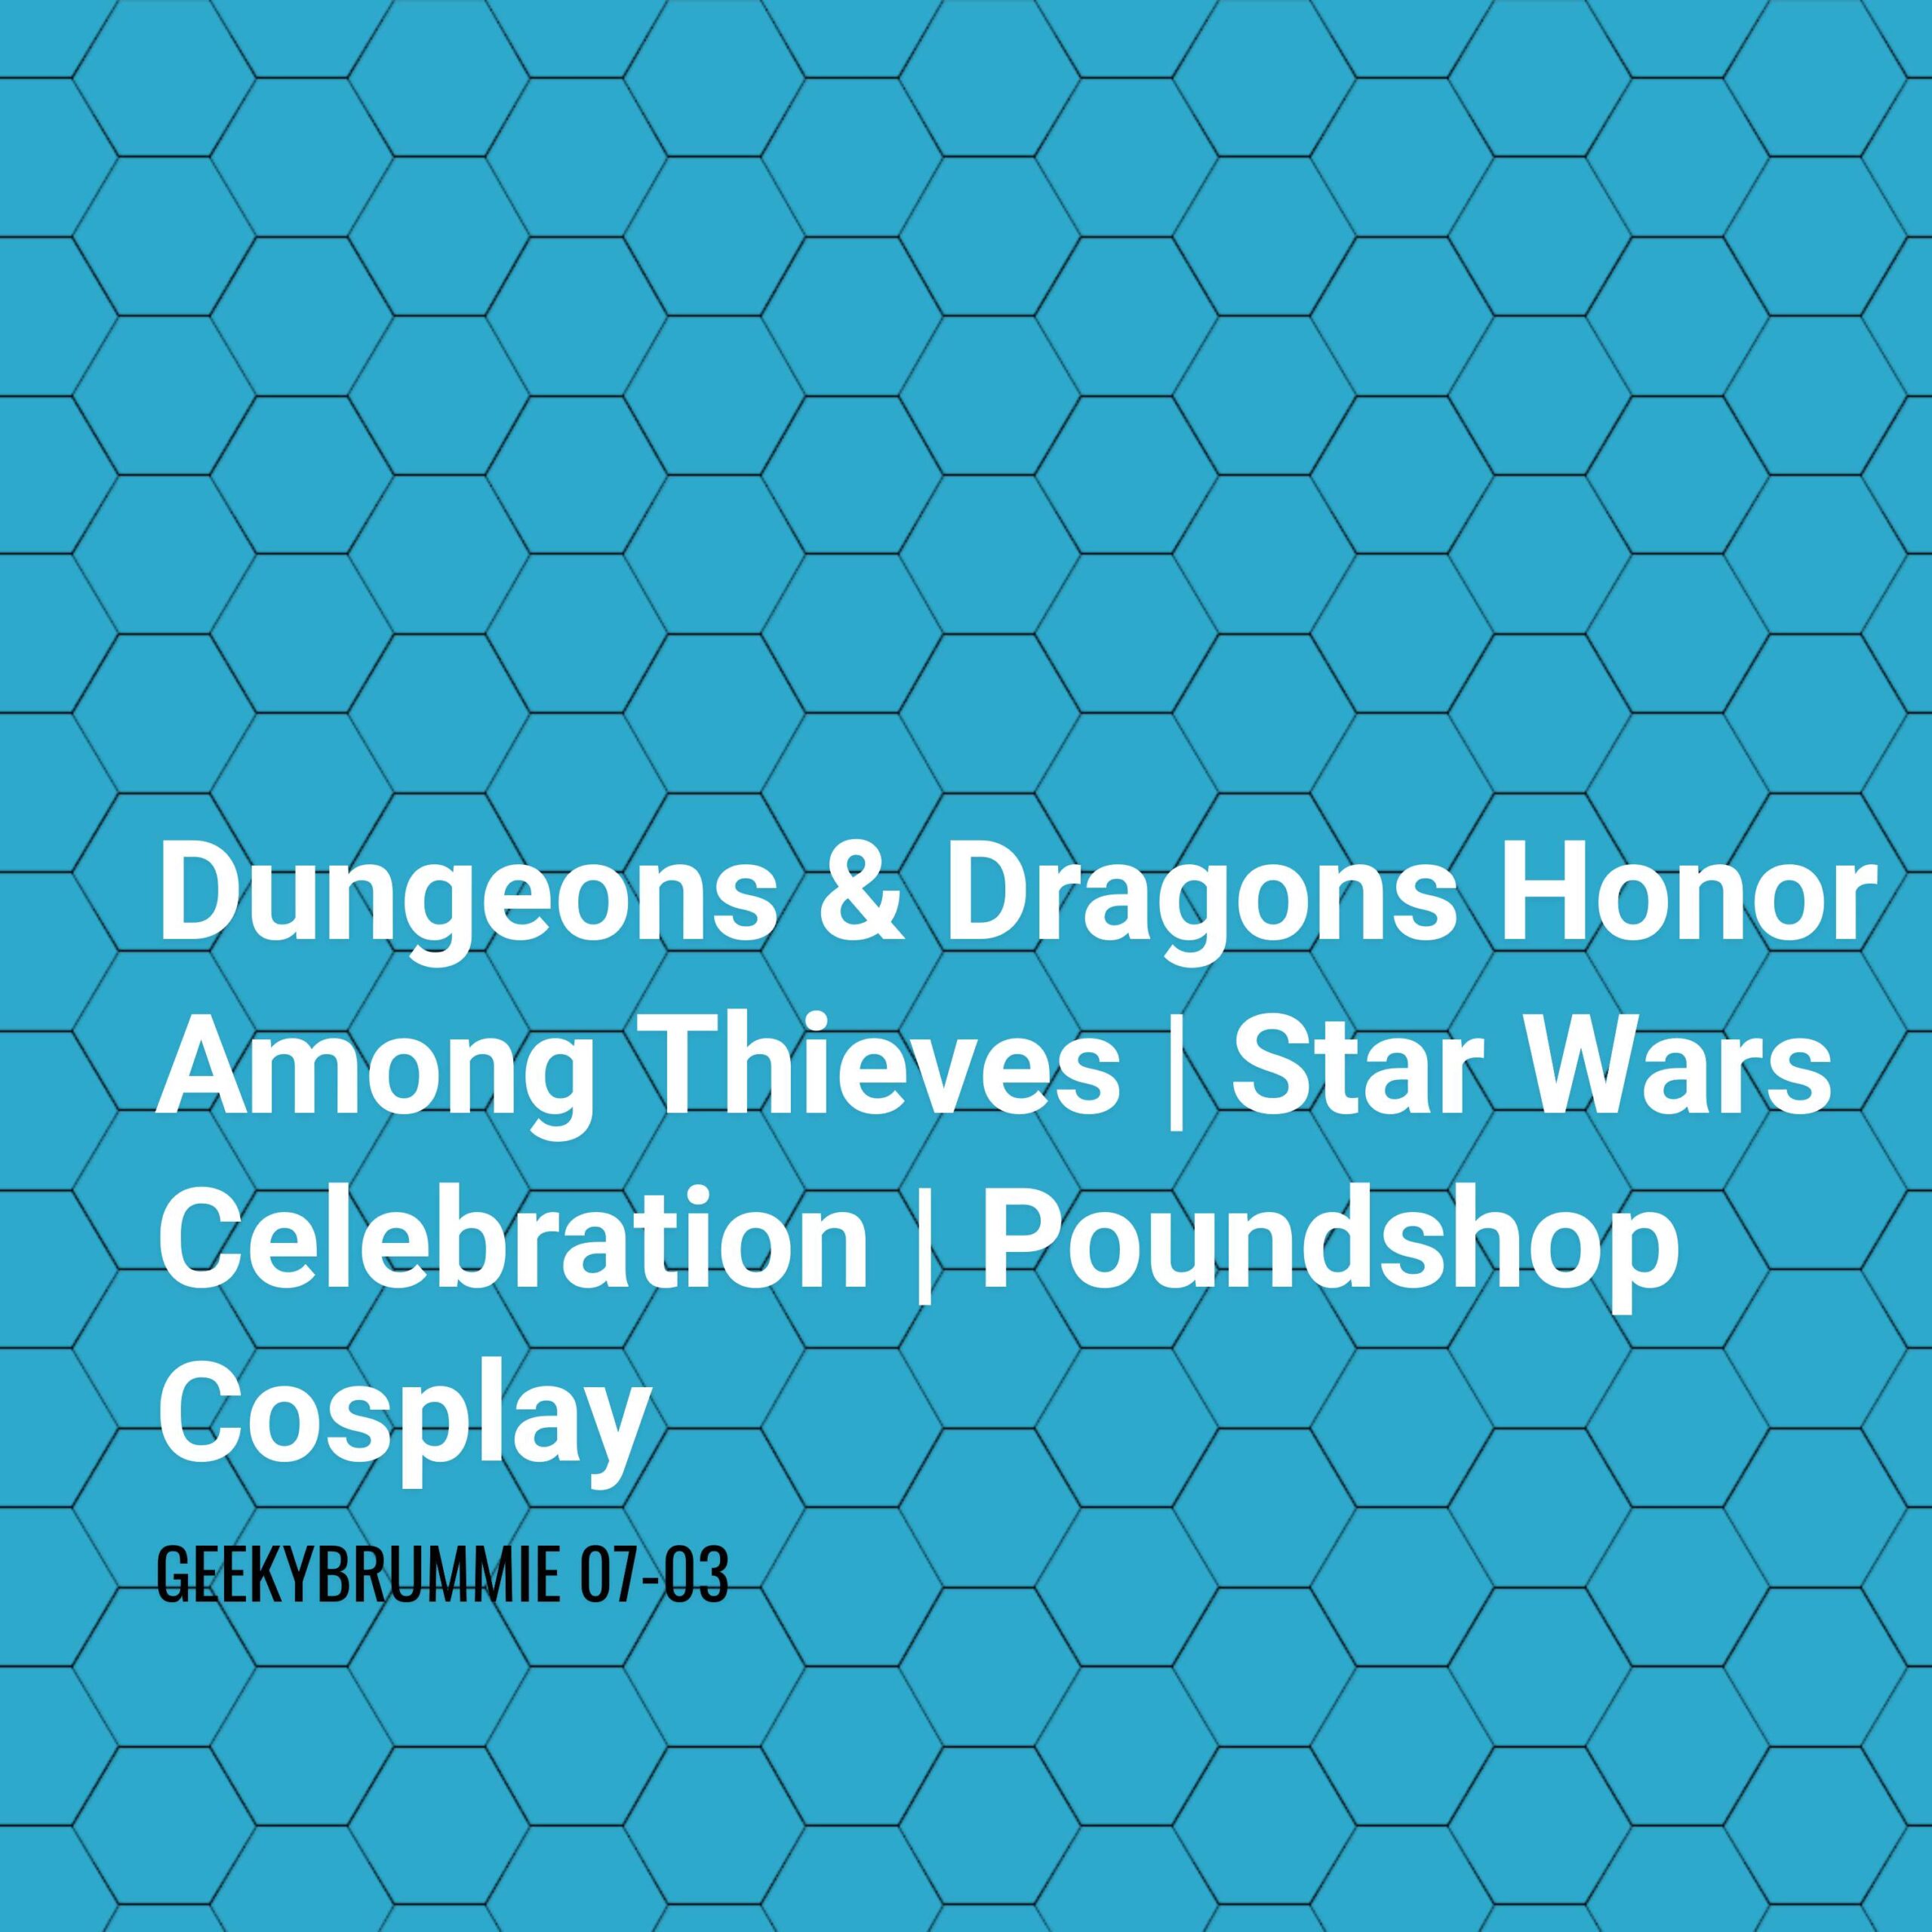 Dungeons & Dragons Honor Among Thieves | Star Wars Celebration | Poundshop Cosplay